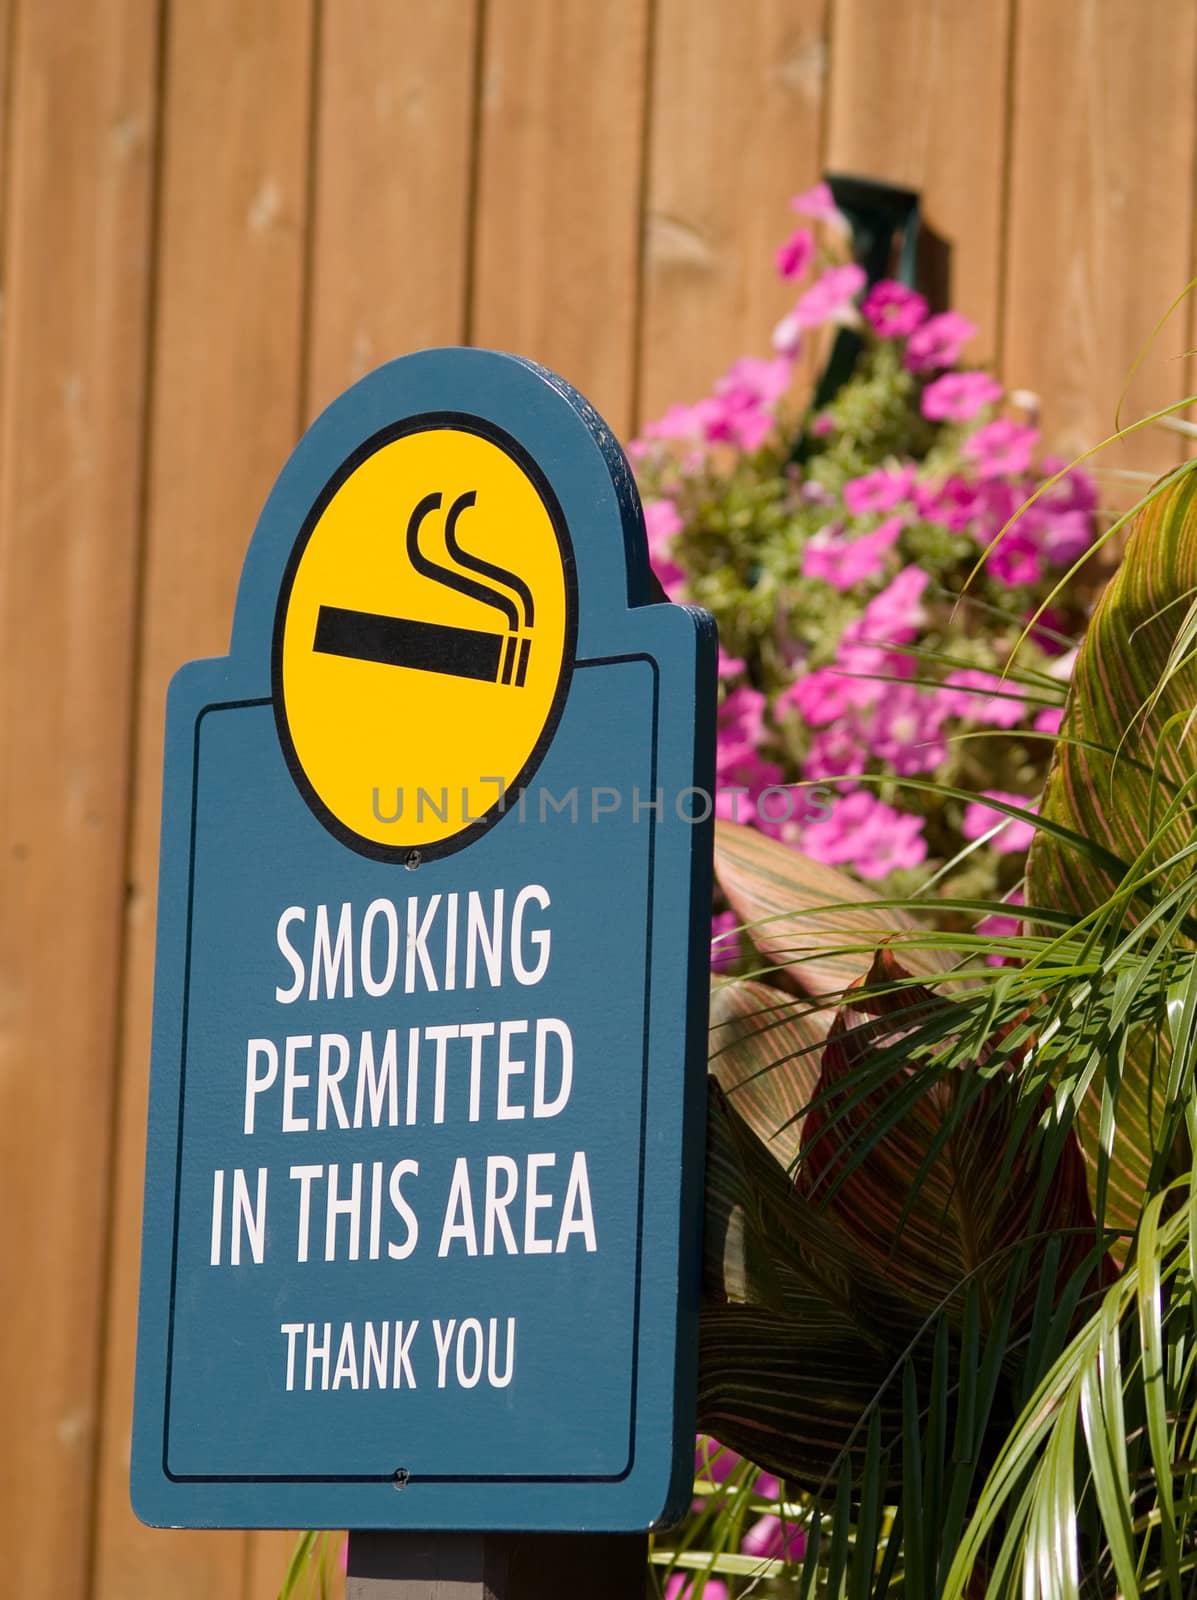 A sign for a smoking permitted area